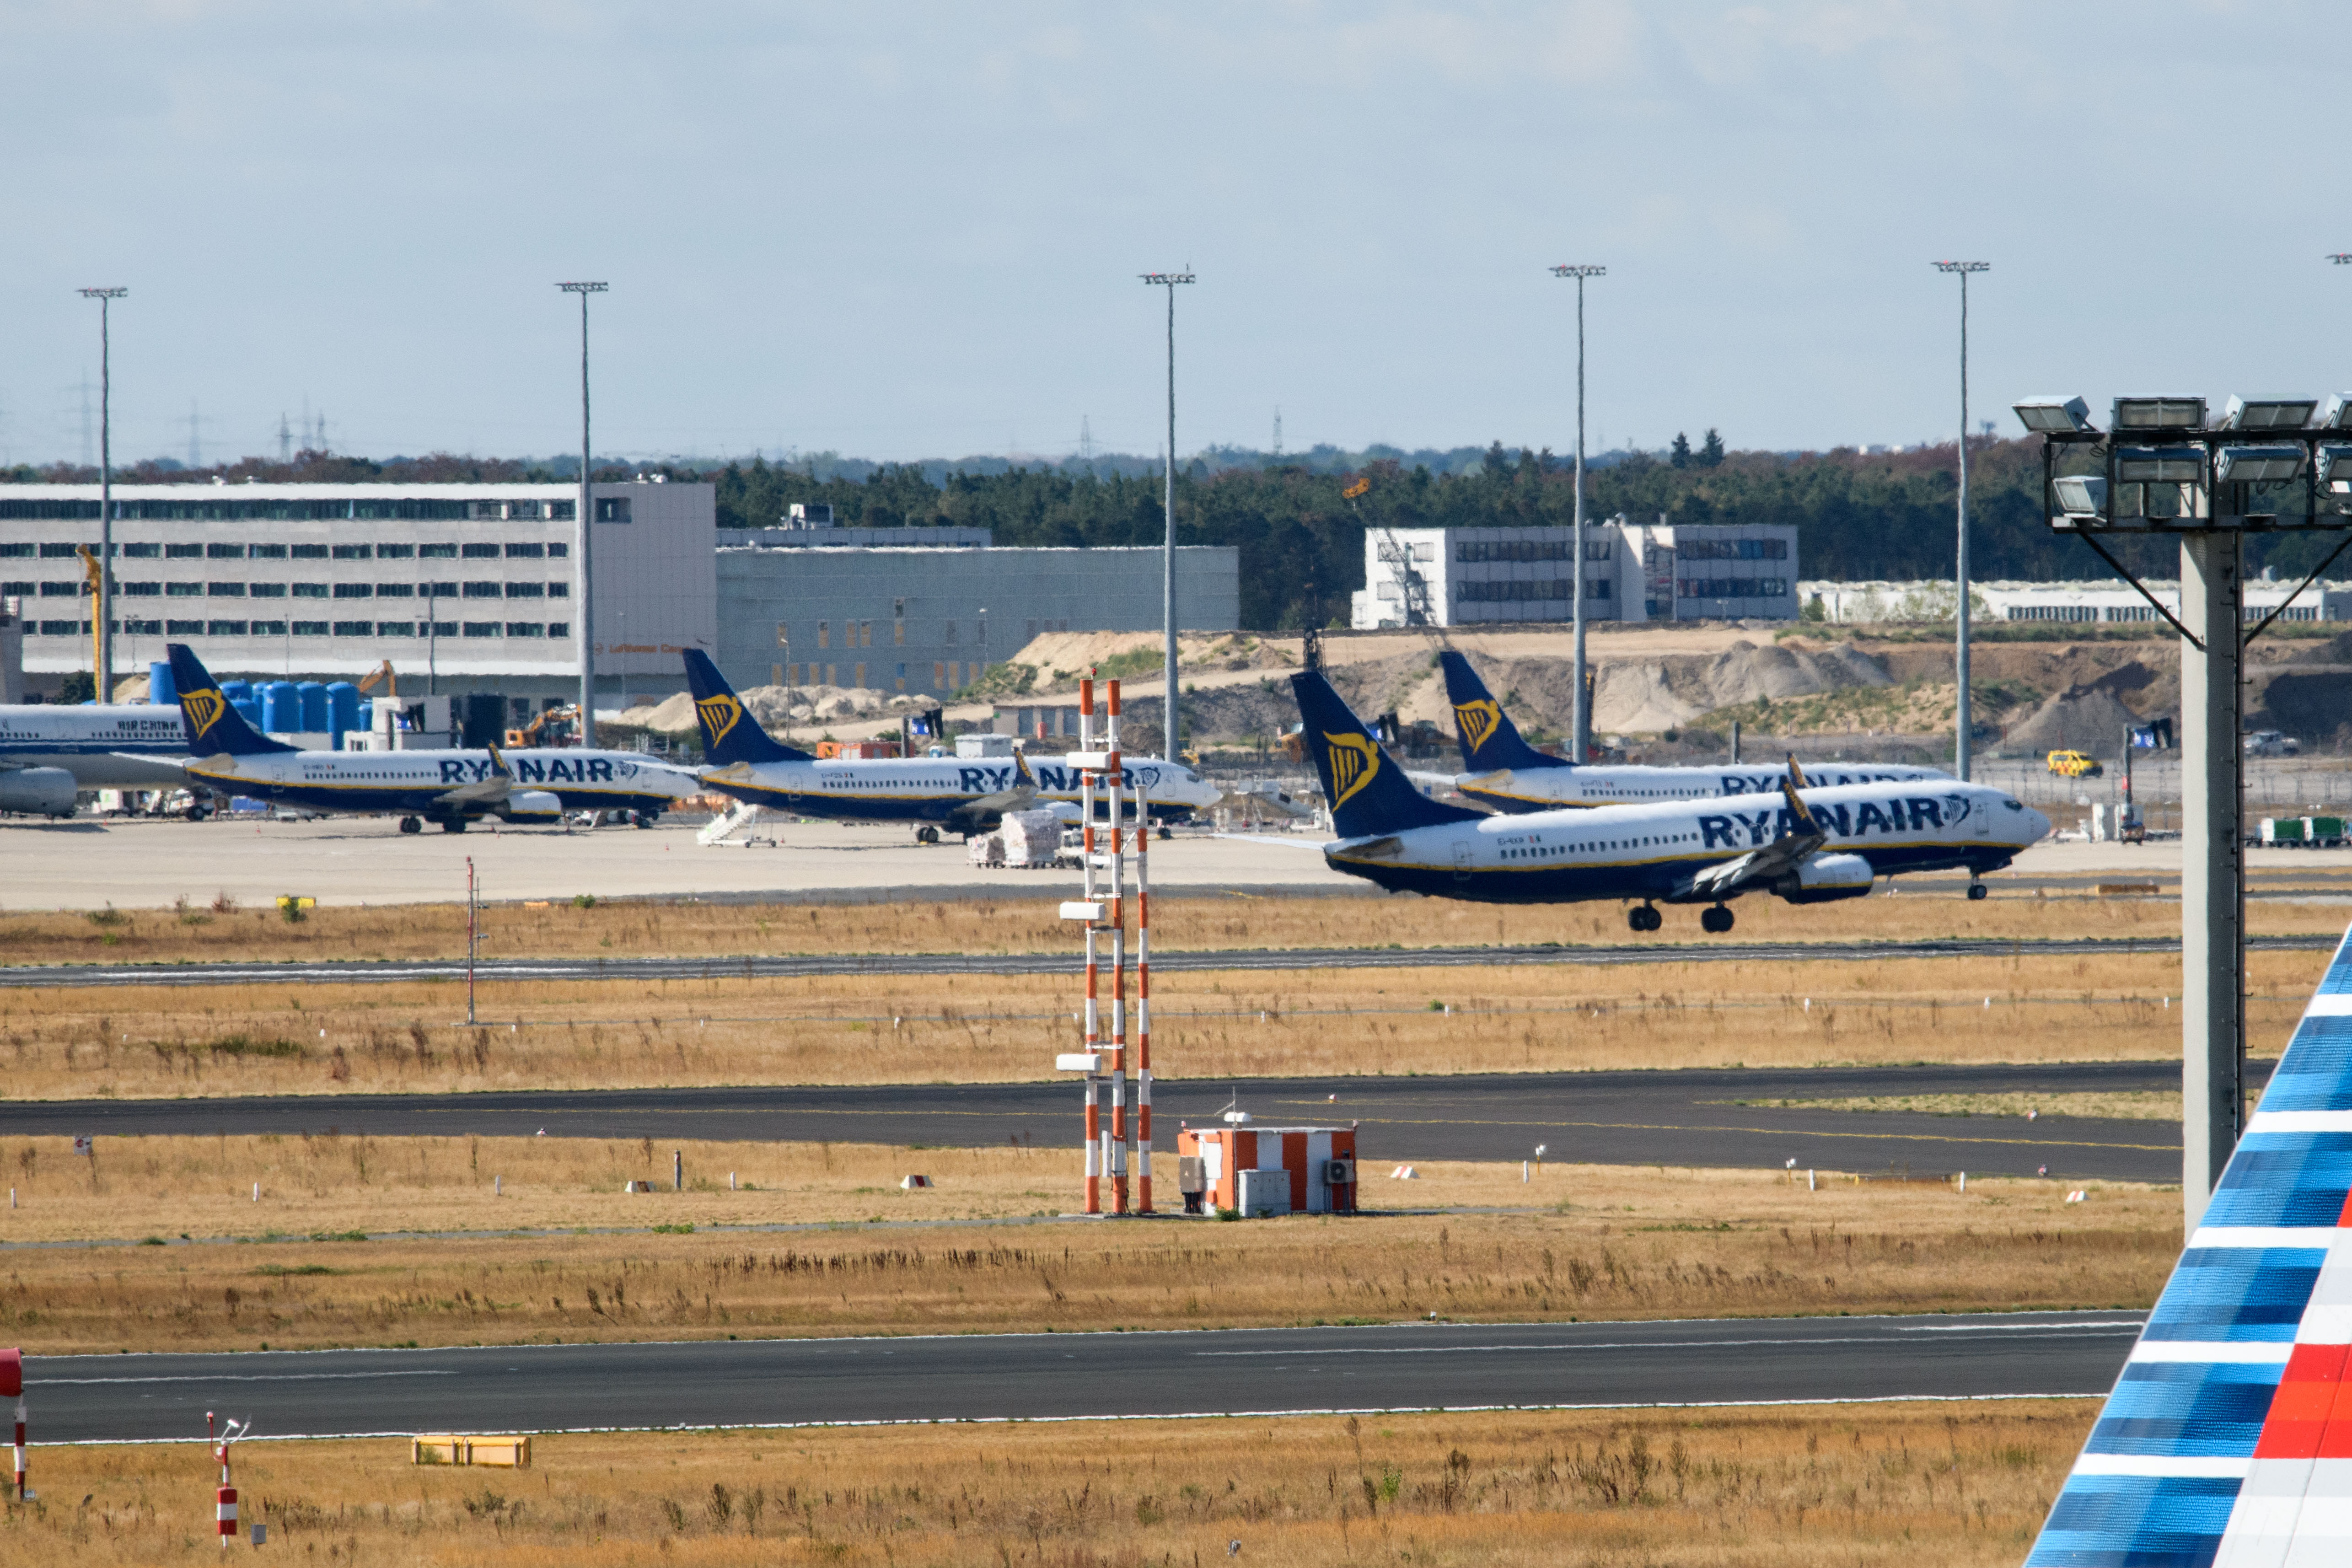 FRANKFURT AM MAIN, GERMANY - AUGUST 10: An airplane of discount airliner RyanAir lands during a 24-hour strike by the pilots while other stand at the Frankfurt Airport on August 10, 2018 in Frankfurt, Germany. RyanAir pilots in Germany, Ireland, Sweden, Belgium and Holland are taking part in the strike over demands for better pay and working conditions. (Photo by Thomas Lohnes/Getty Images)